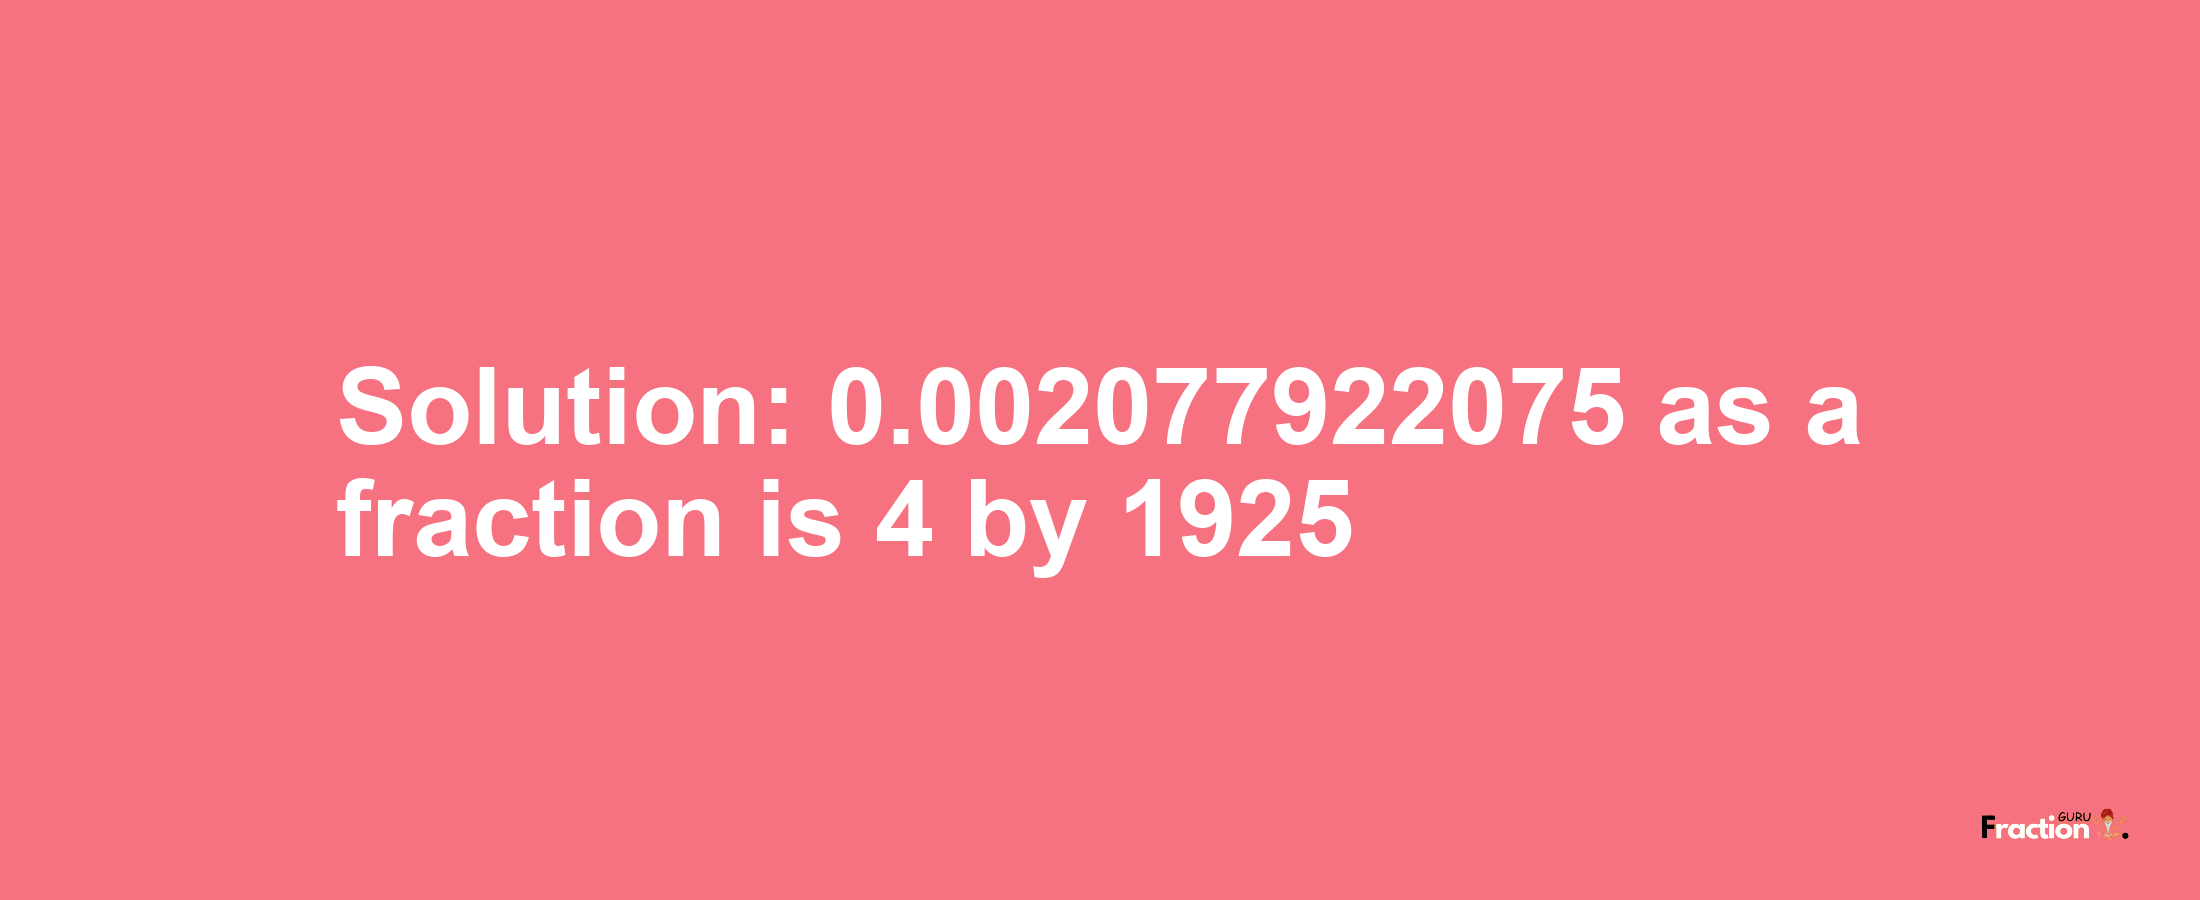 Solution:0.002077922075 as a fraction is 4/1925